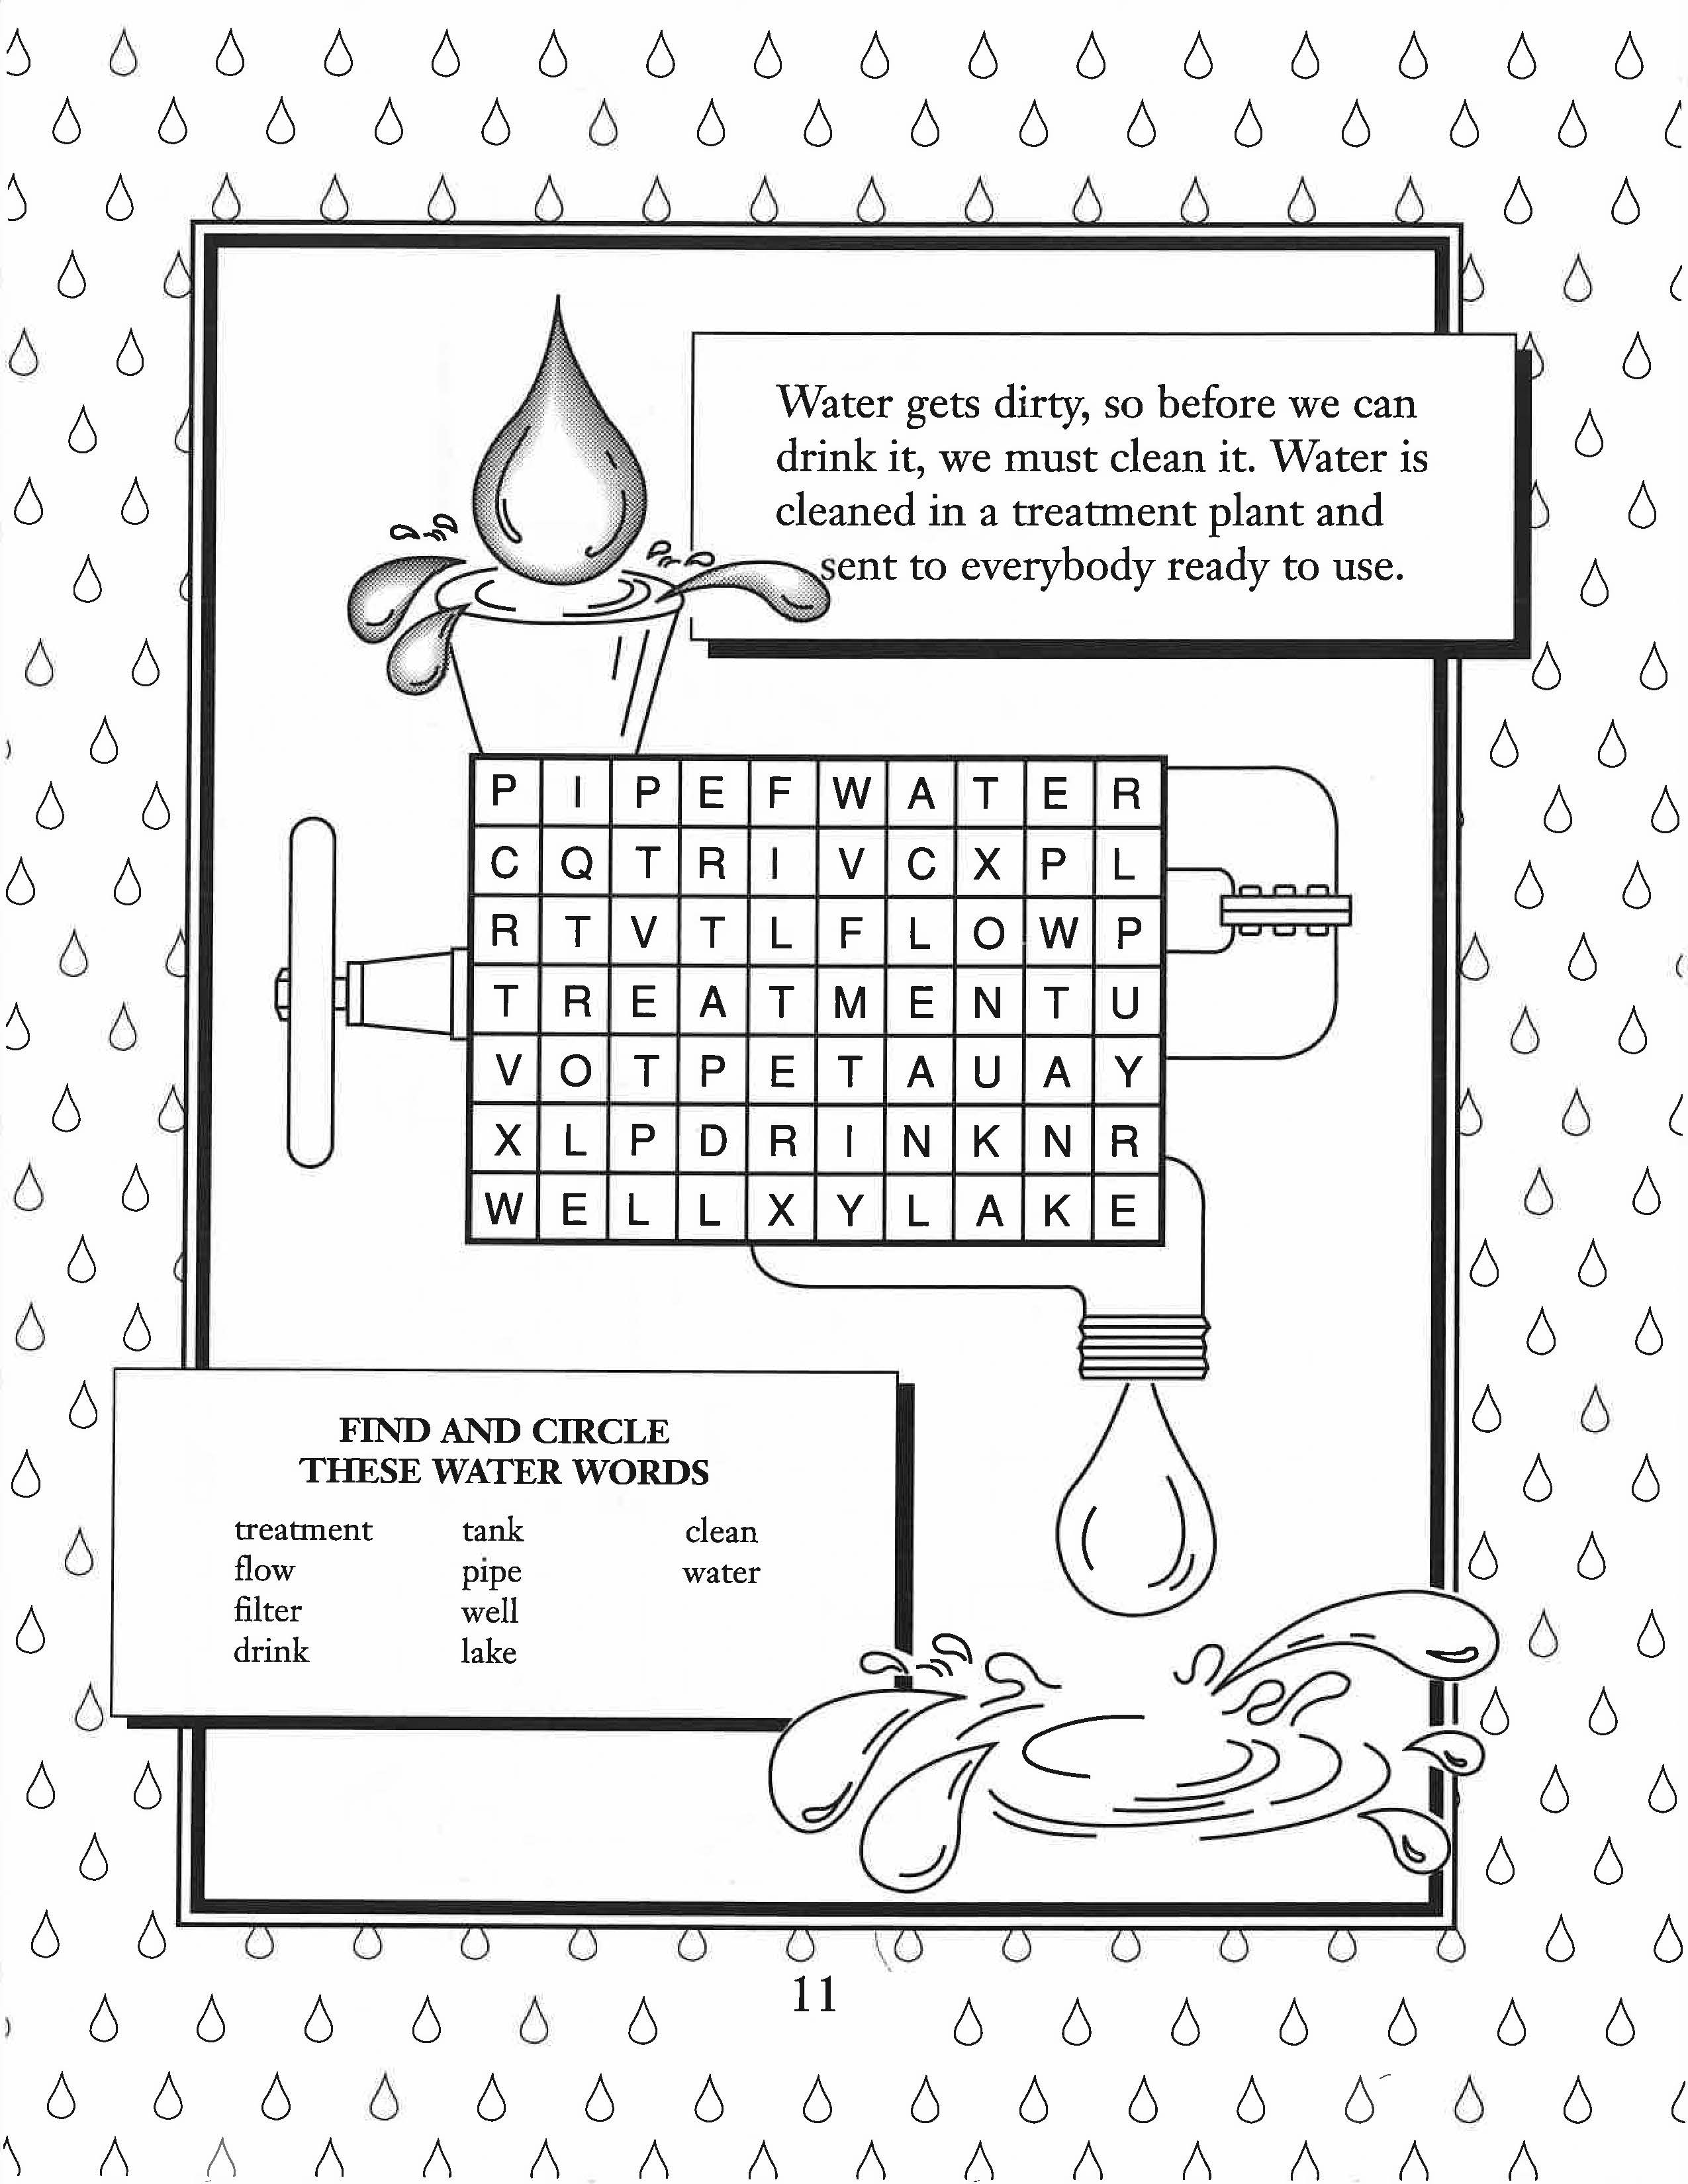 Kids need something to do at home? Download our coloring & activity